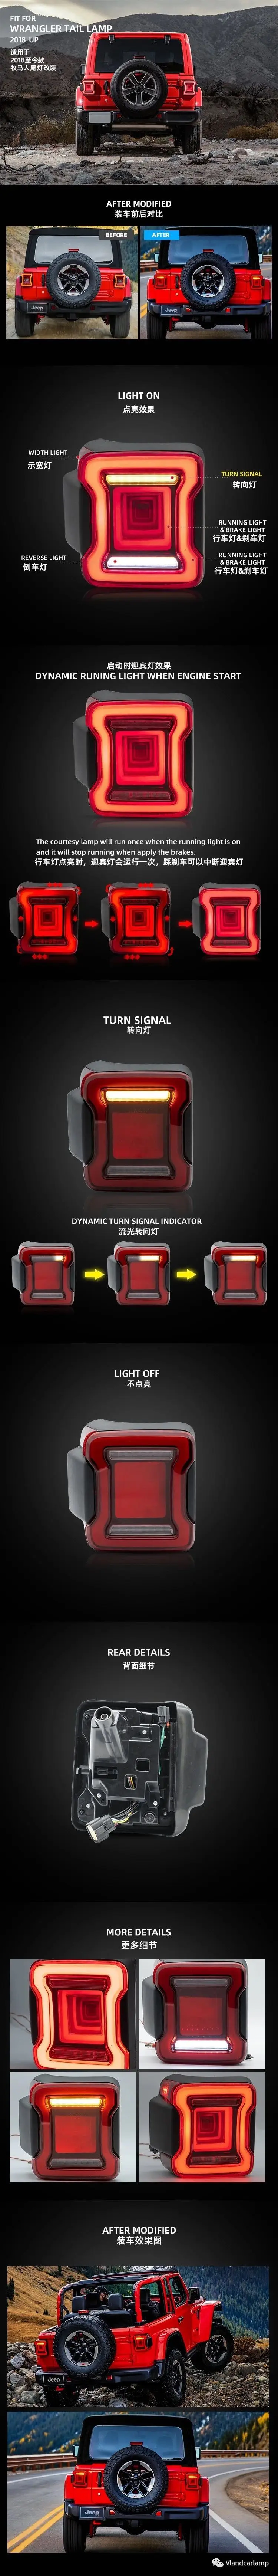 VLAND factory for Wrangler LED Taillight 2018-UP auto car tail lamp with DRL+Reverse+Brake+Moving turn signal+Tunnel feeling